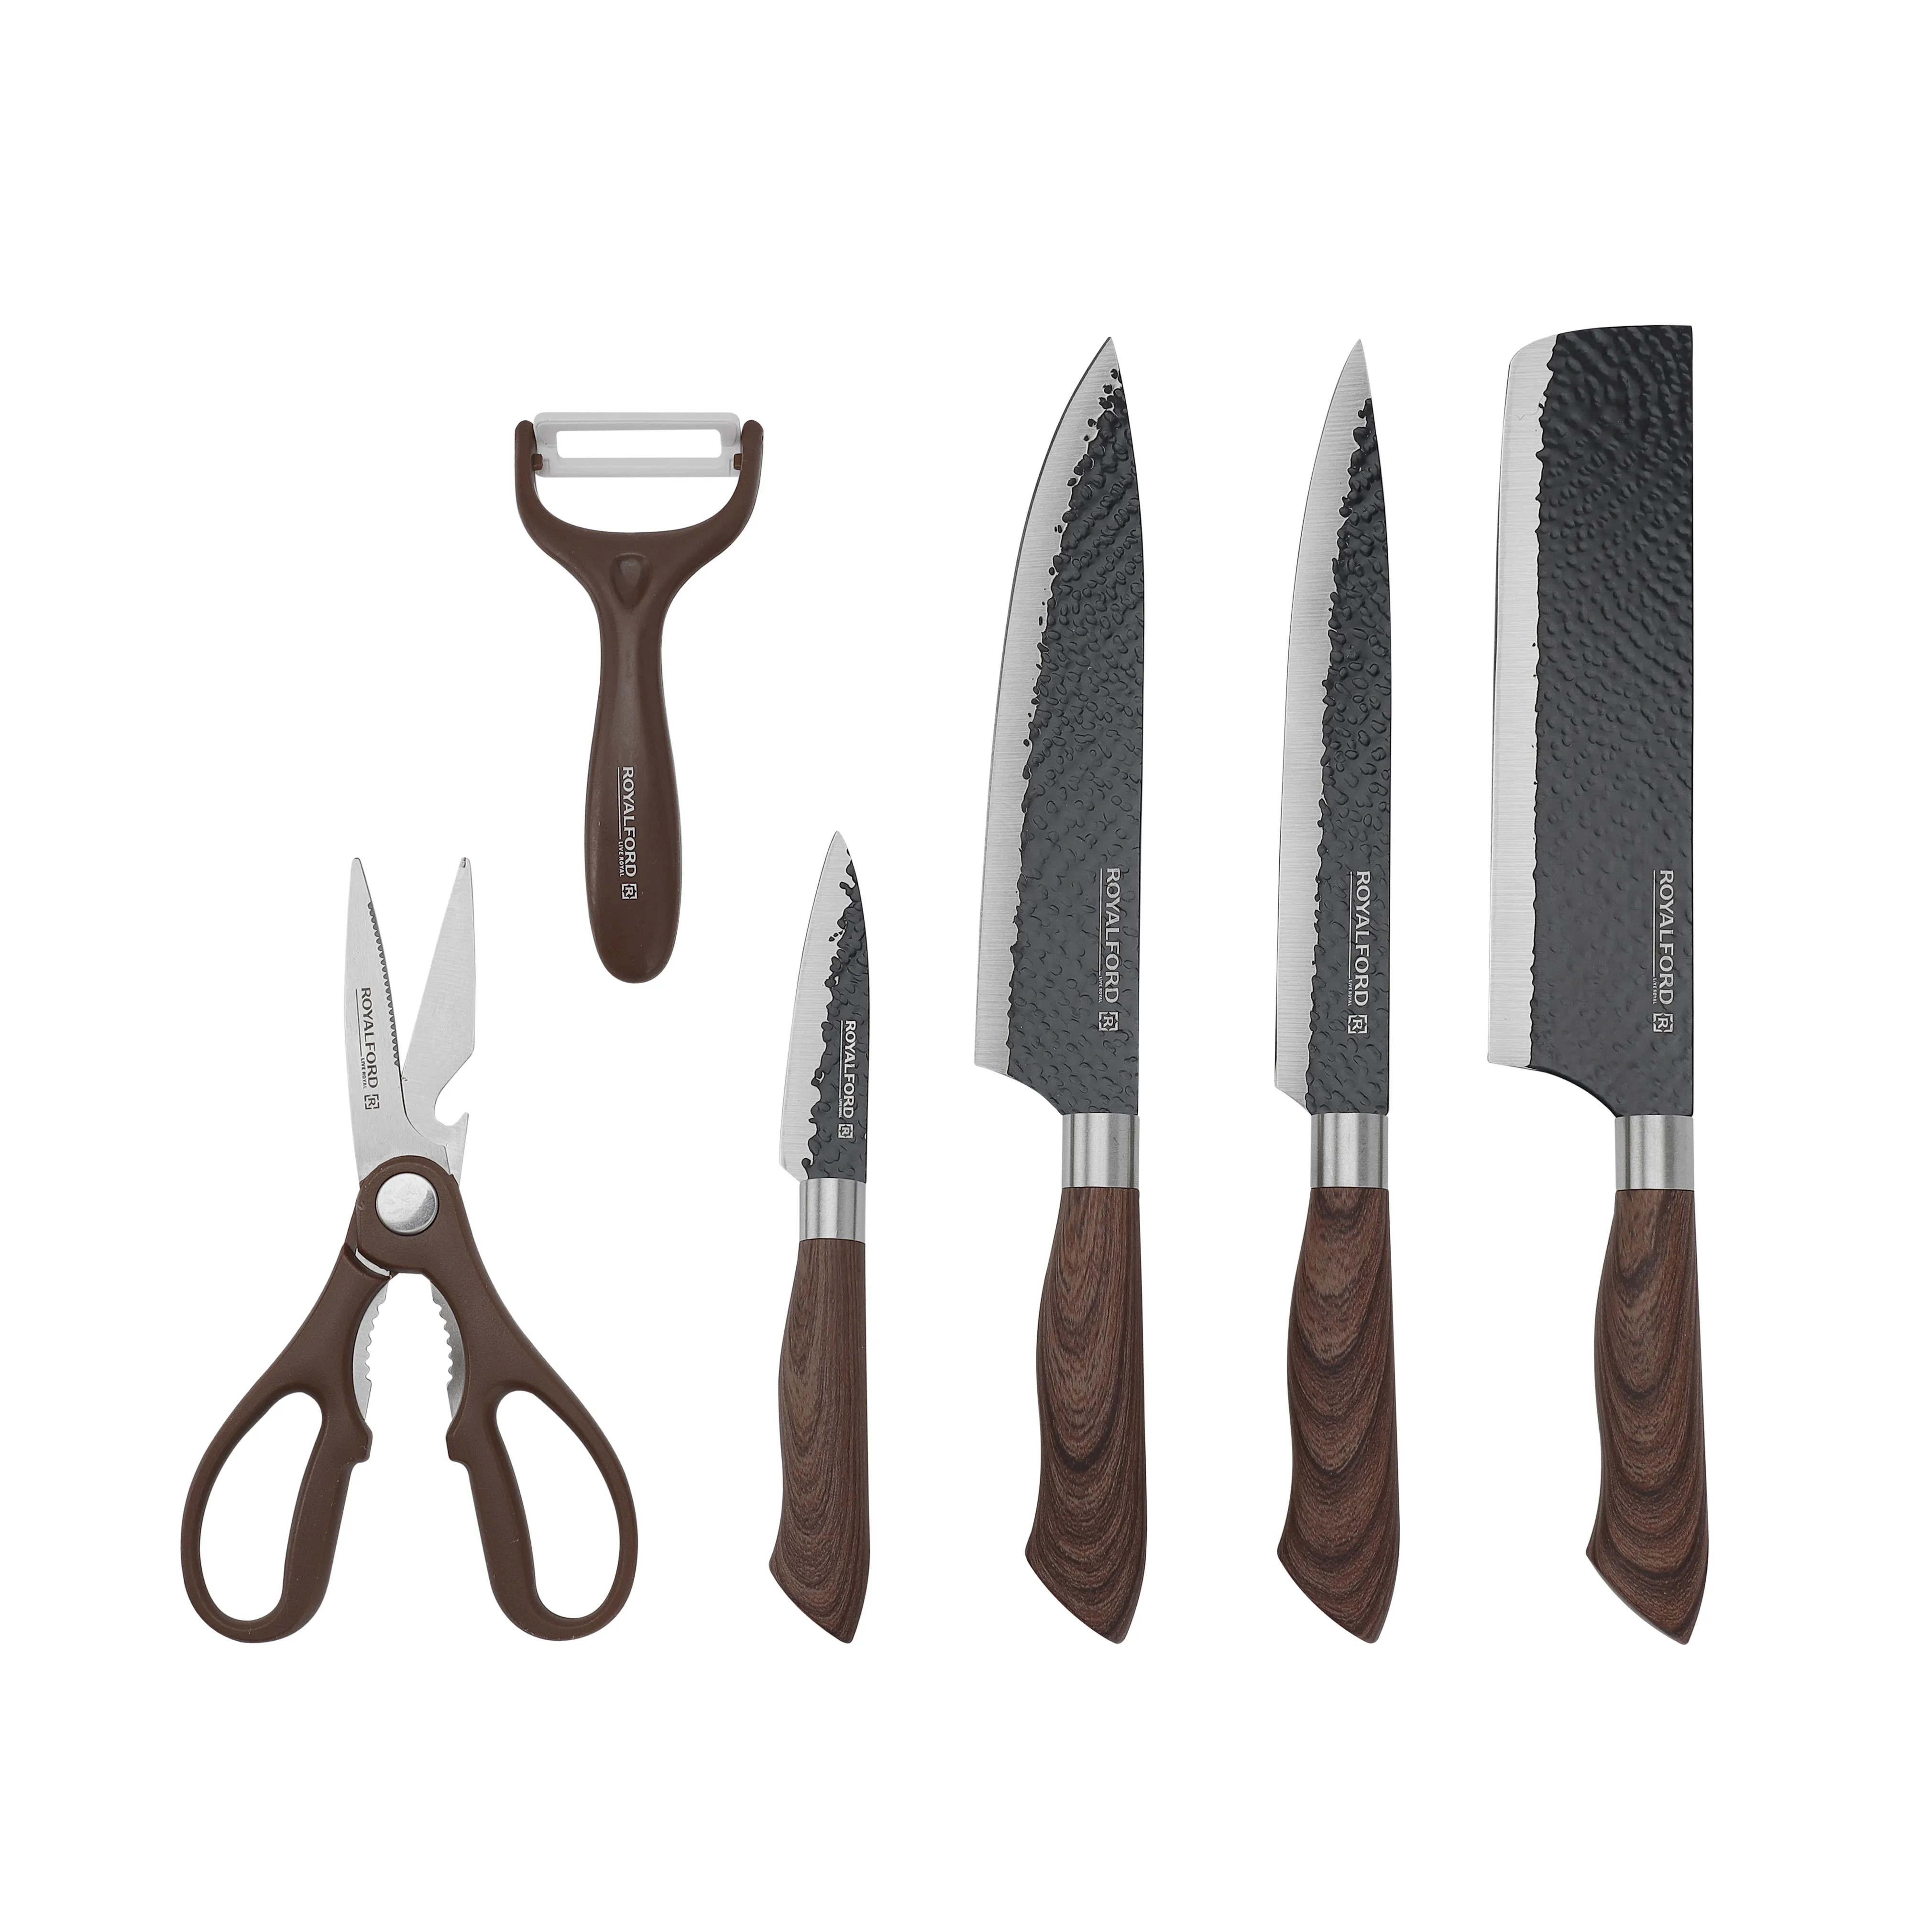 Royalford 6pcs Kitchen Knife Set with Non-Stick Coating, RF10462 Extra-Short Stainless-Steel Blades Premium-Quality PP Handle with TPR Wood-Finish Multi-Functional Set